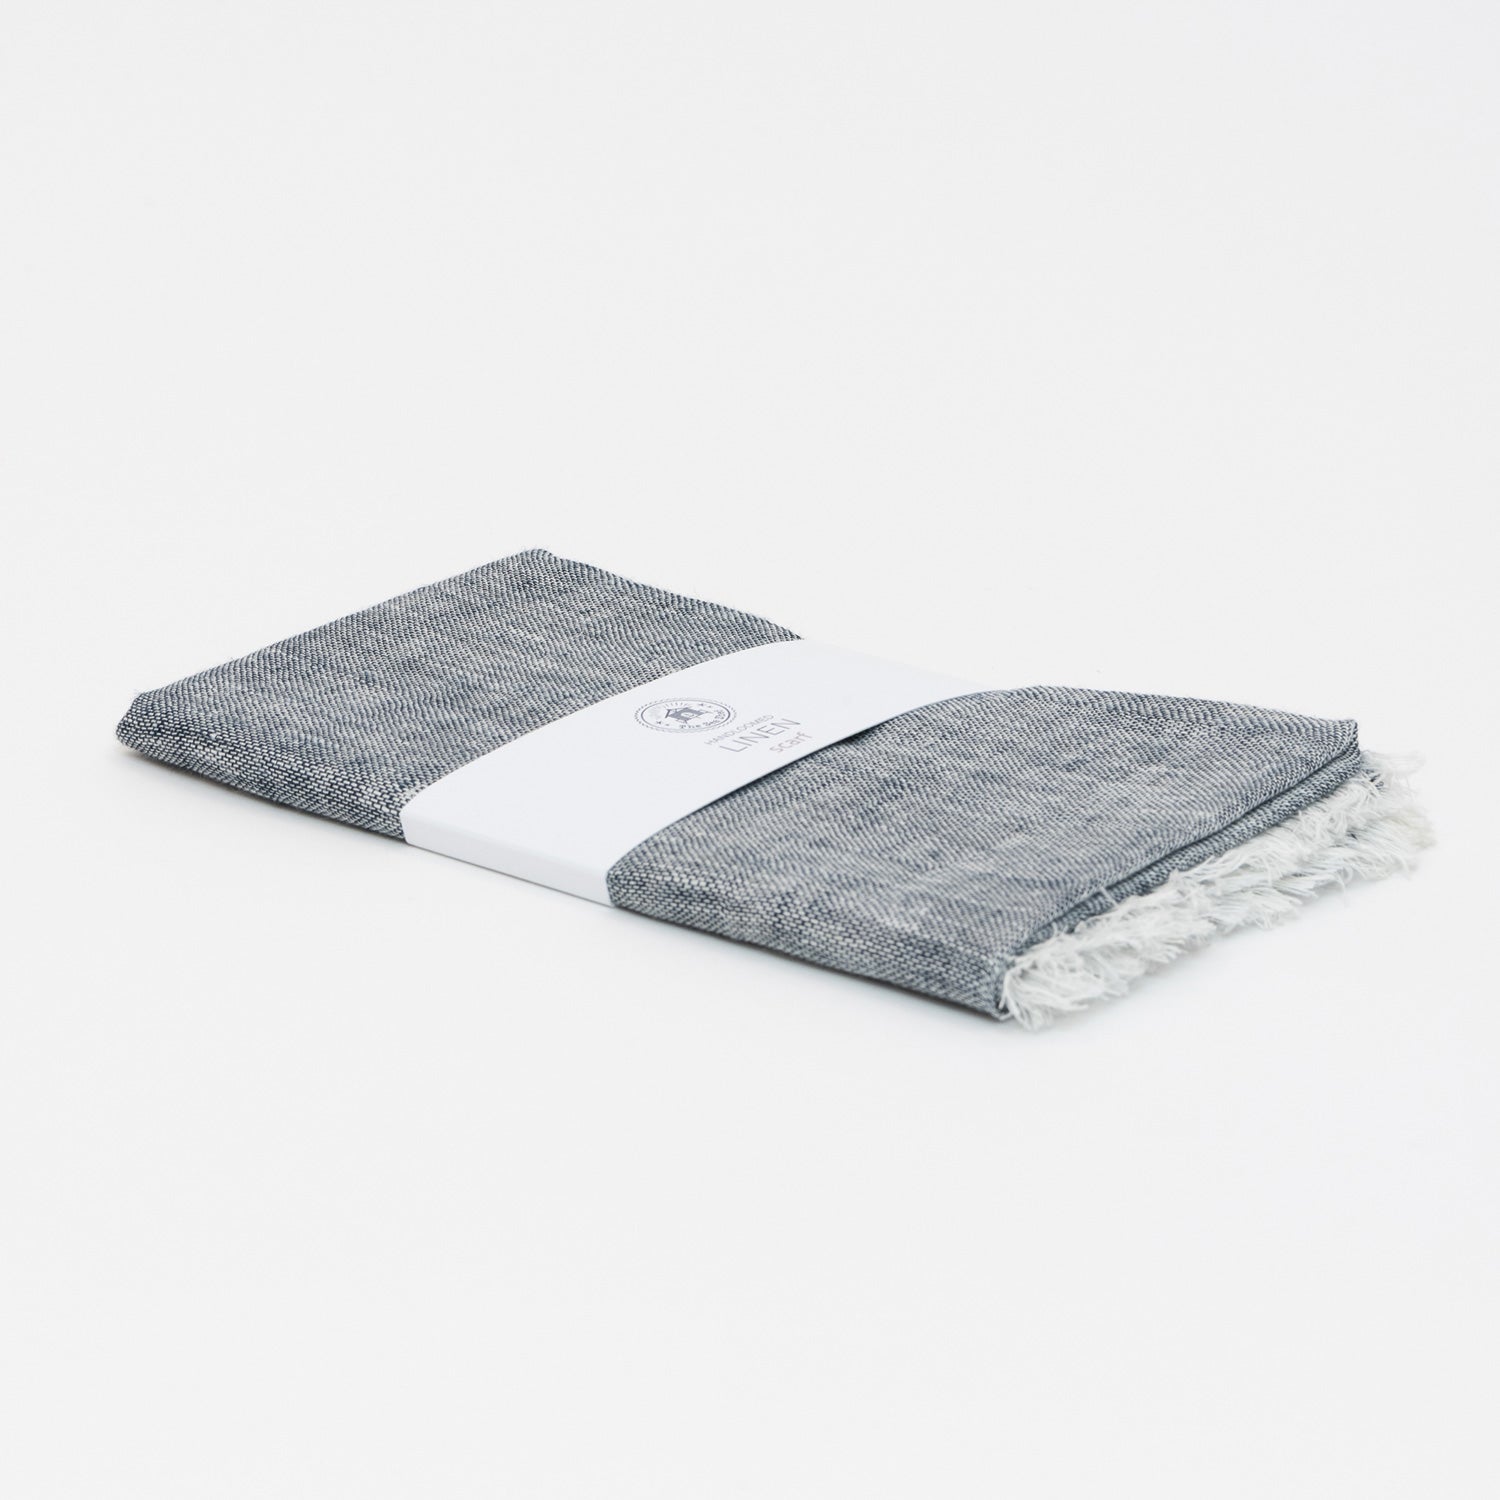 A photo of the linen denim blue scarf packaged and on a white background.